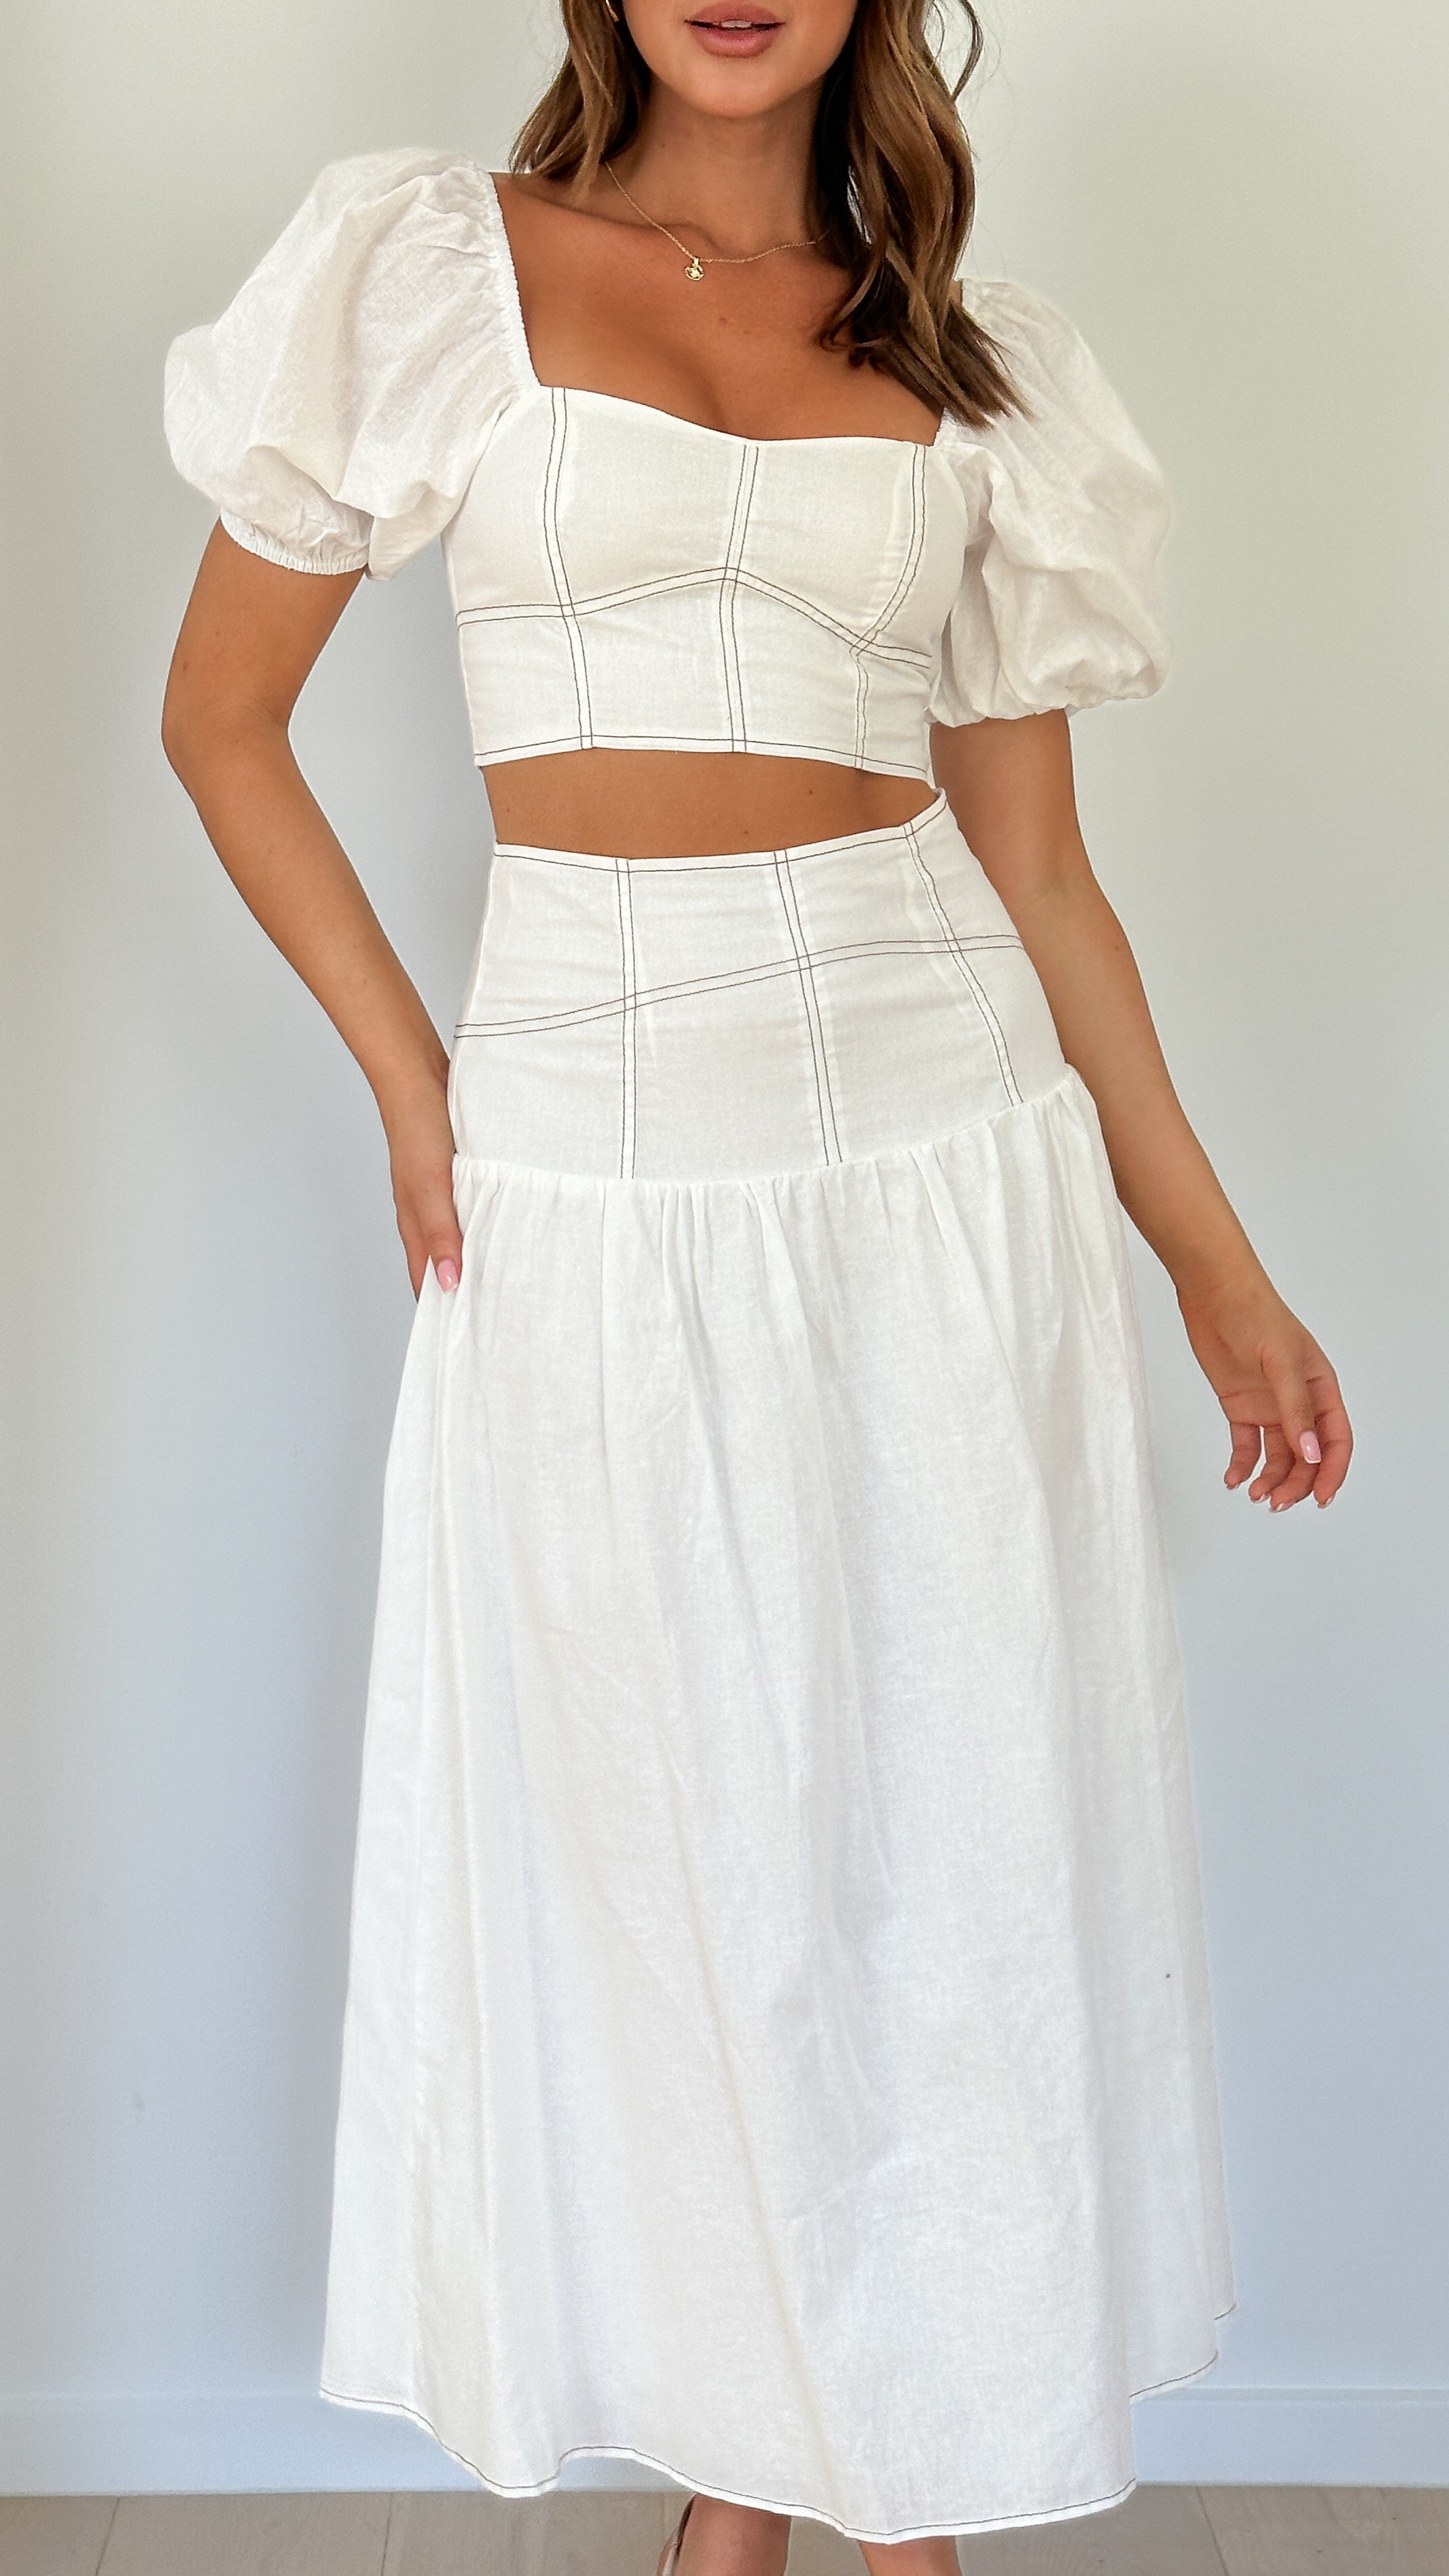 Vivien Top and Maxi Skirt Set - White - Billy J